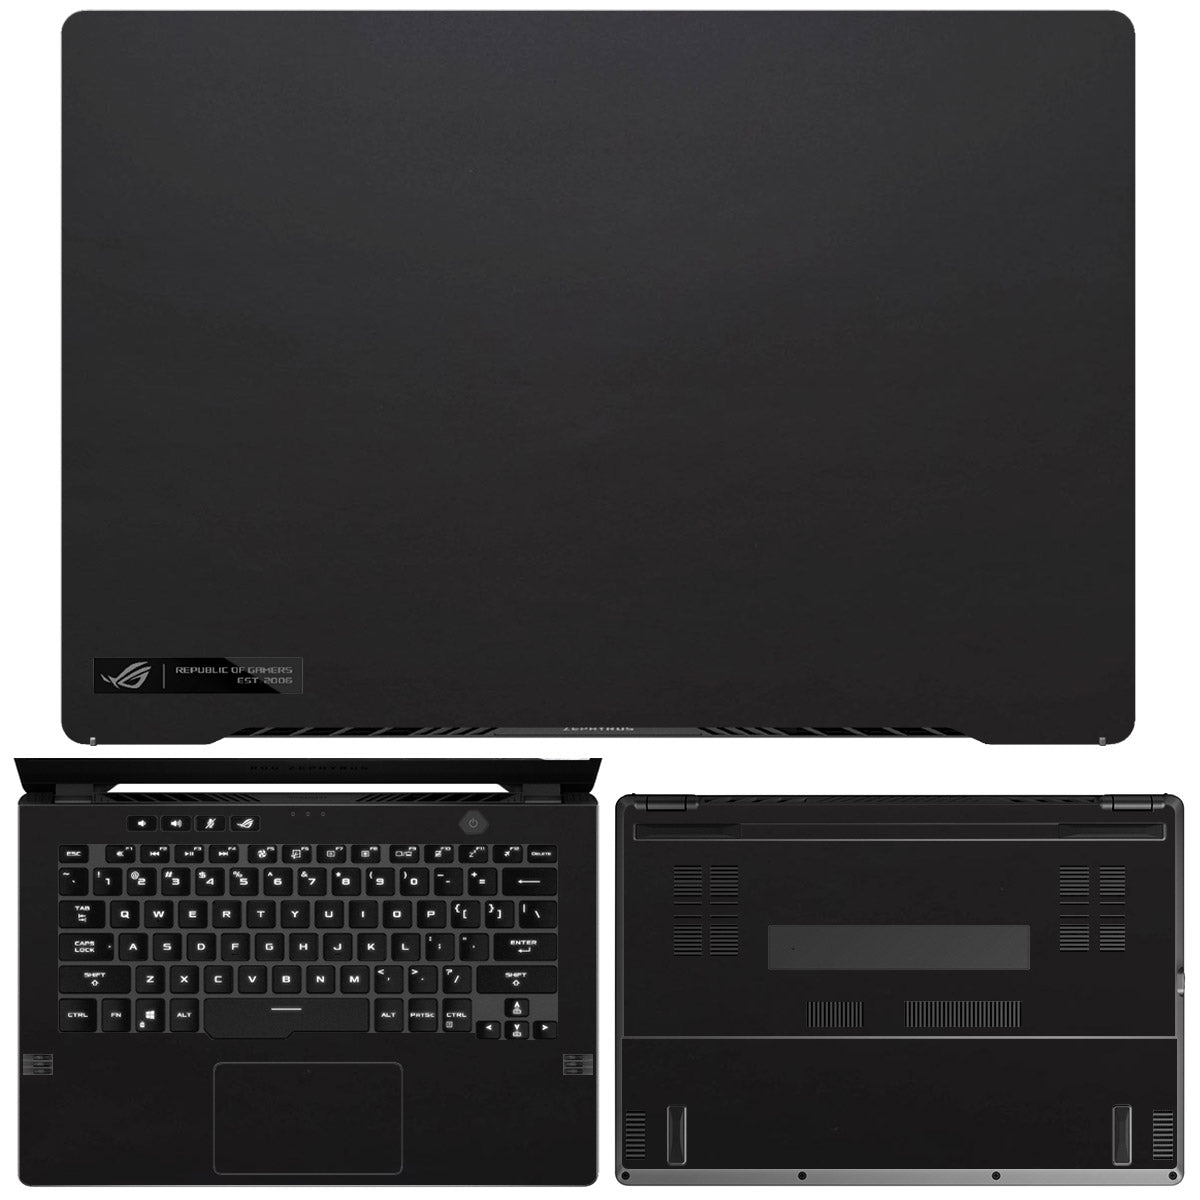 for Asus Zephyrus G14 (2020 - 2021)